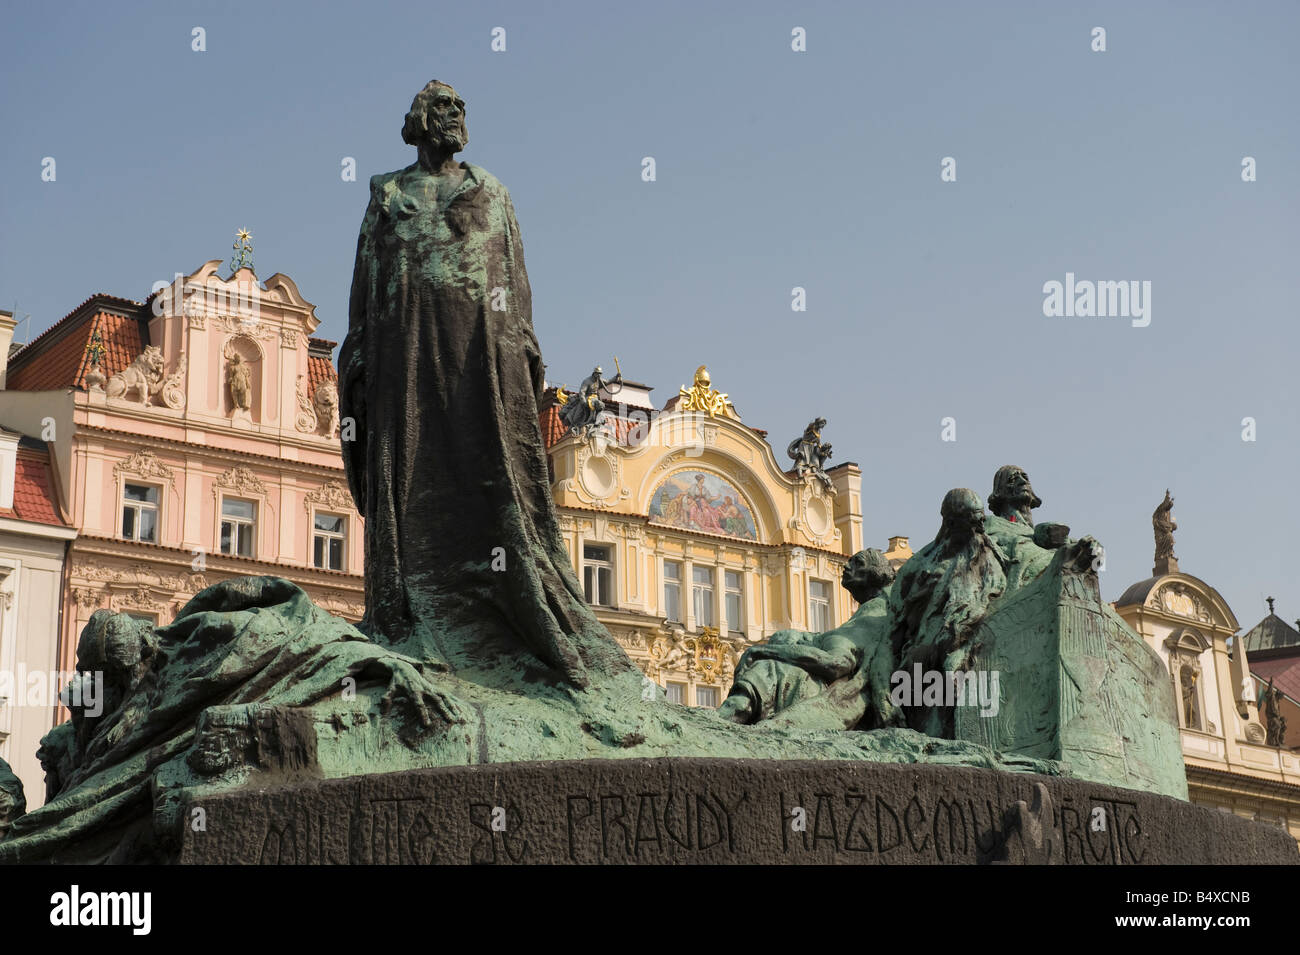 Historical monument in plaza Stock Photo